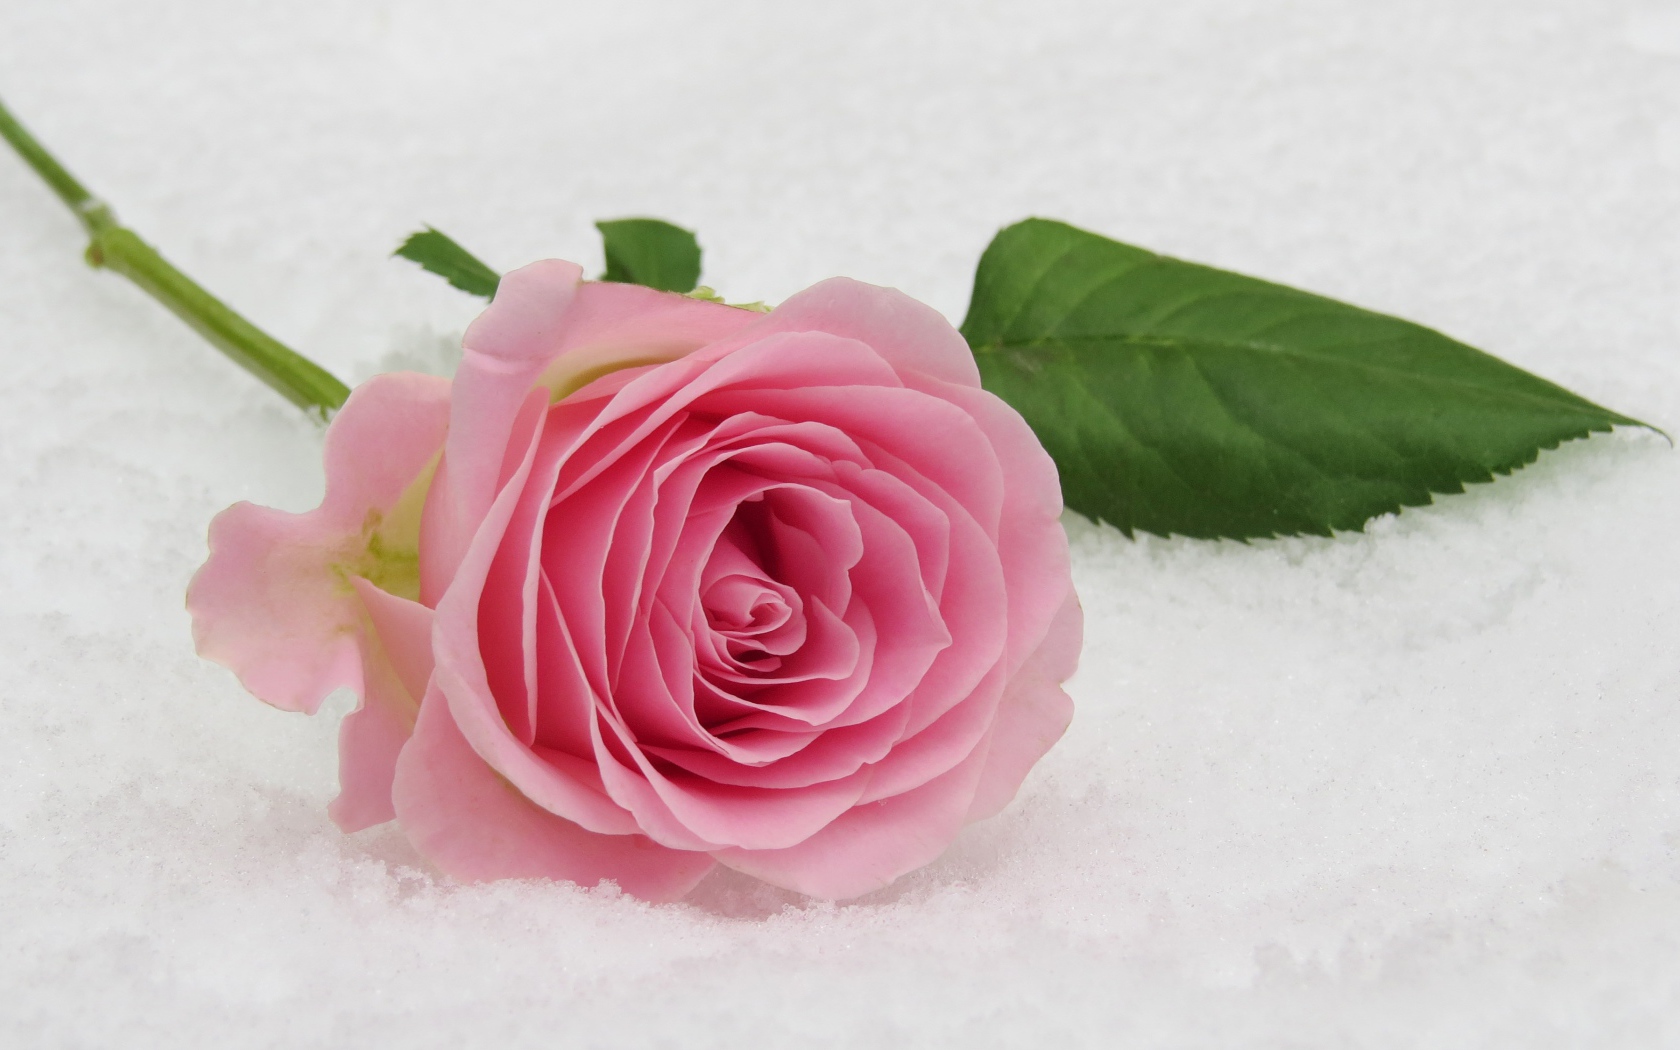 Delicate pink rose flower in the snow